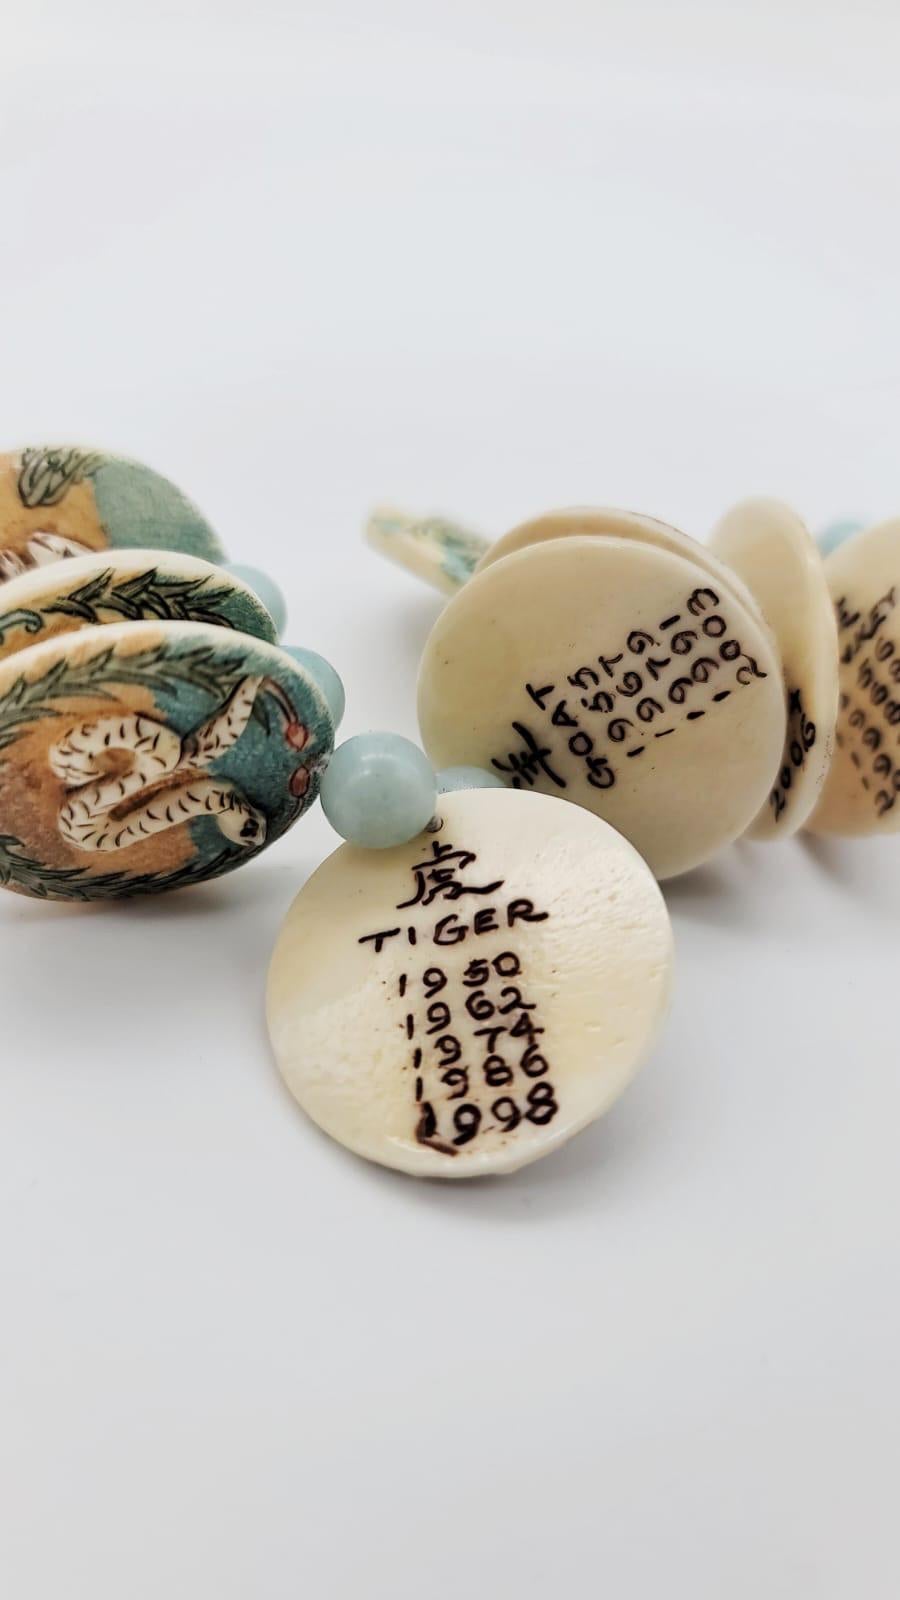 A.Jeschel Bracelet hand-painted Chinese zodiac carved bone, Amazonite beads In New Condition For Sale In Miami, FL